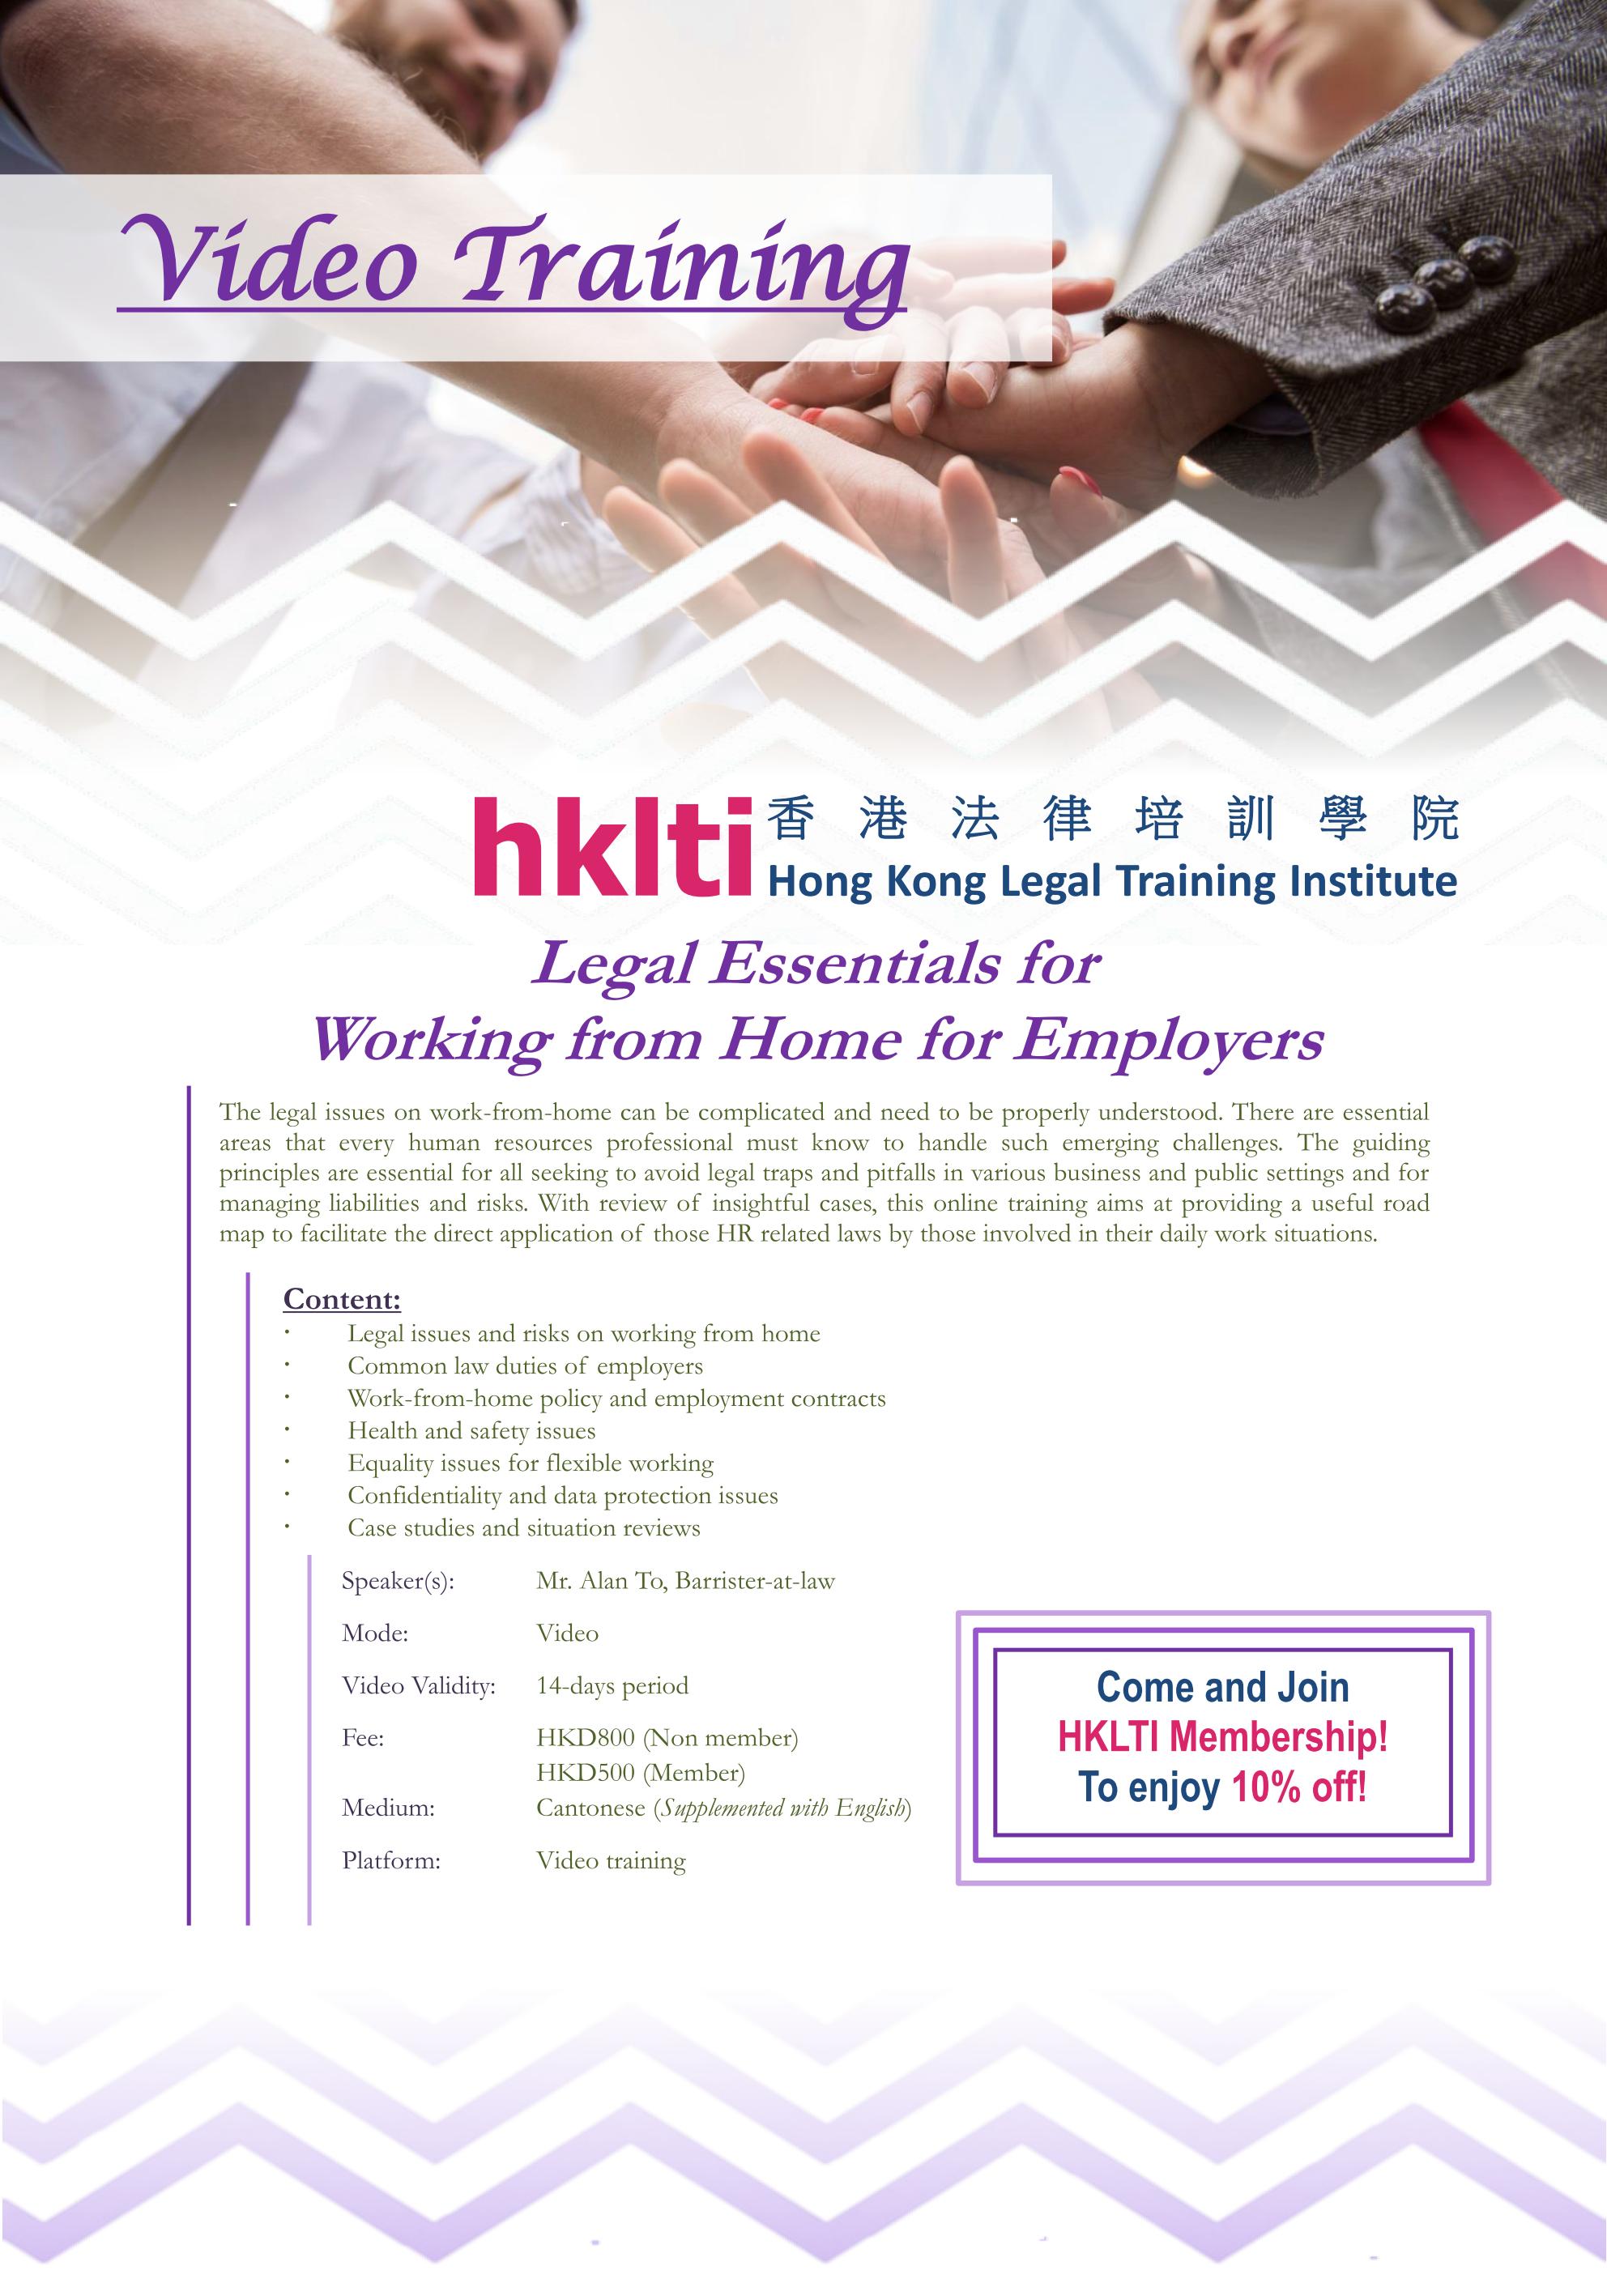 HKLTI video traing Legal Essentials for Working from Home for Employers flyer new